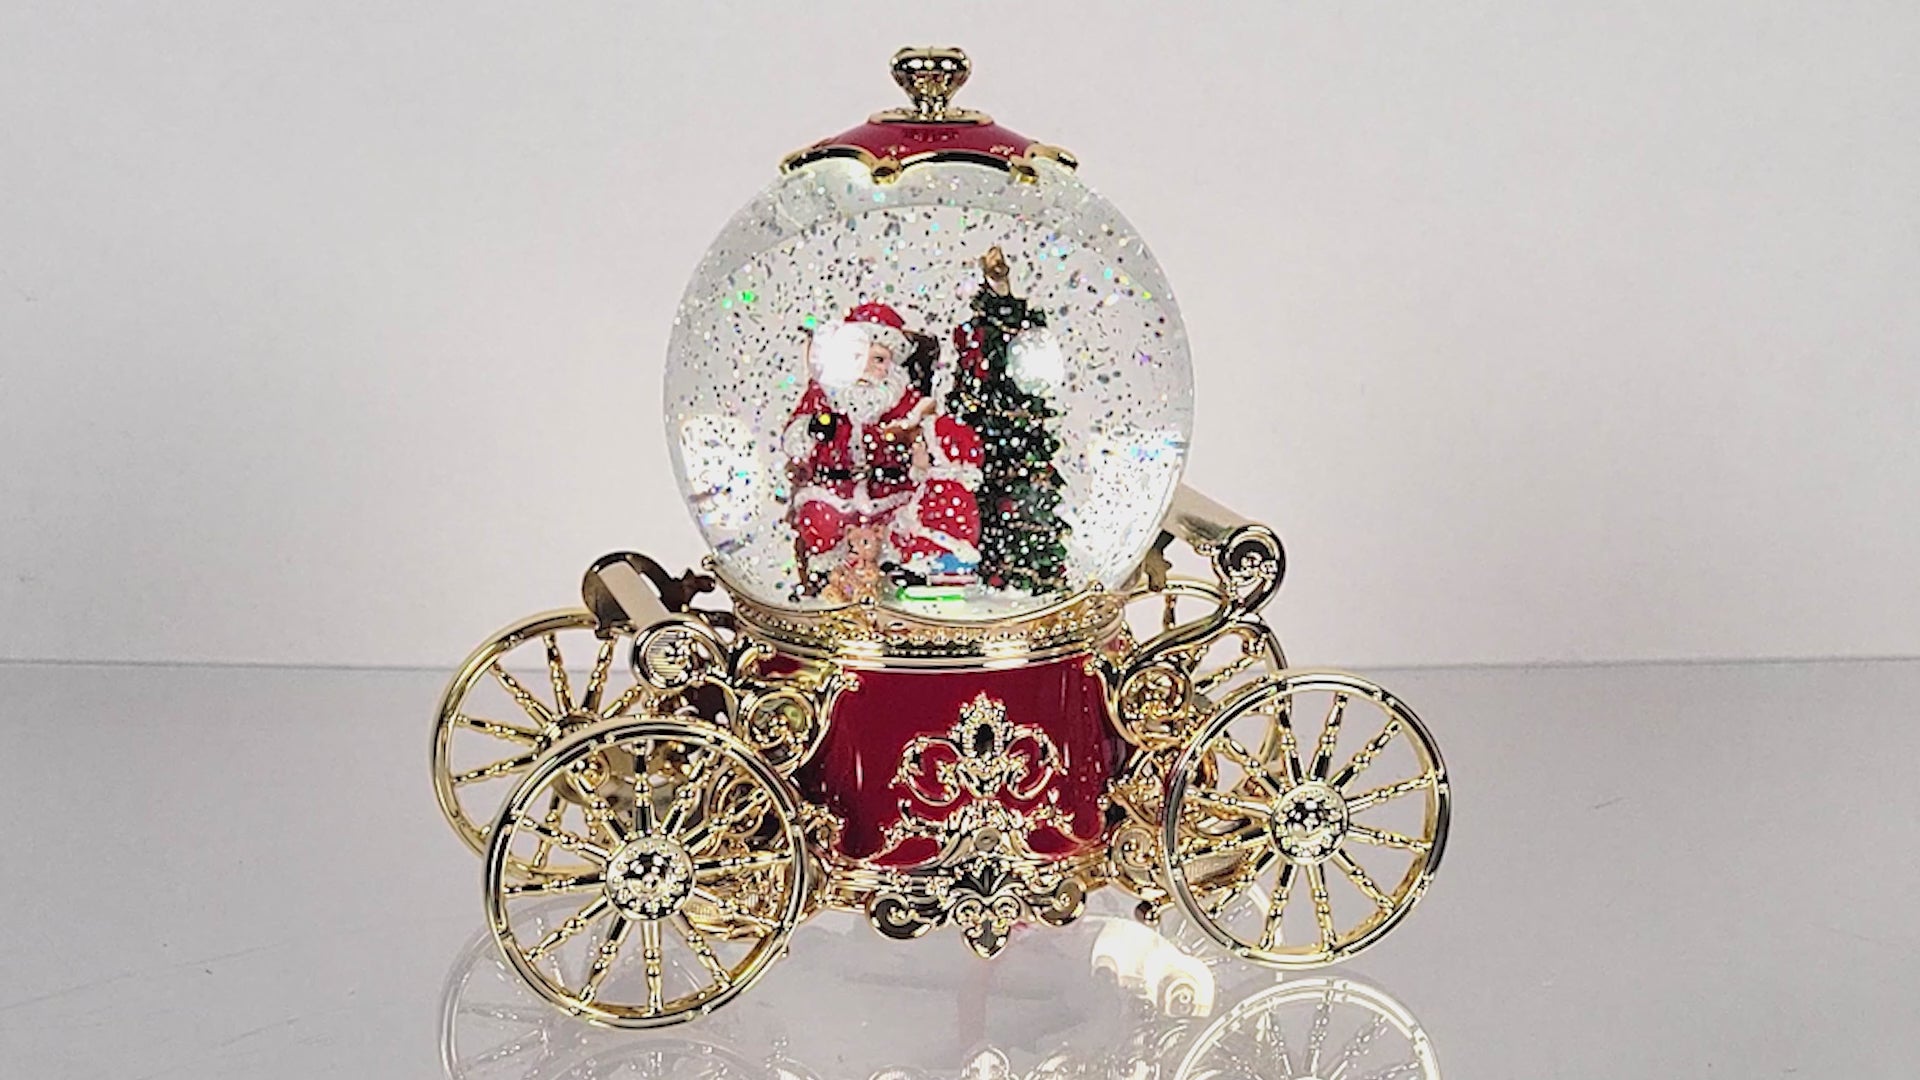 Lighted Musical Spinning Water Globe Santa Carriage